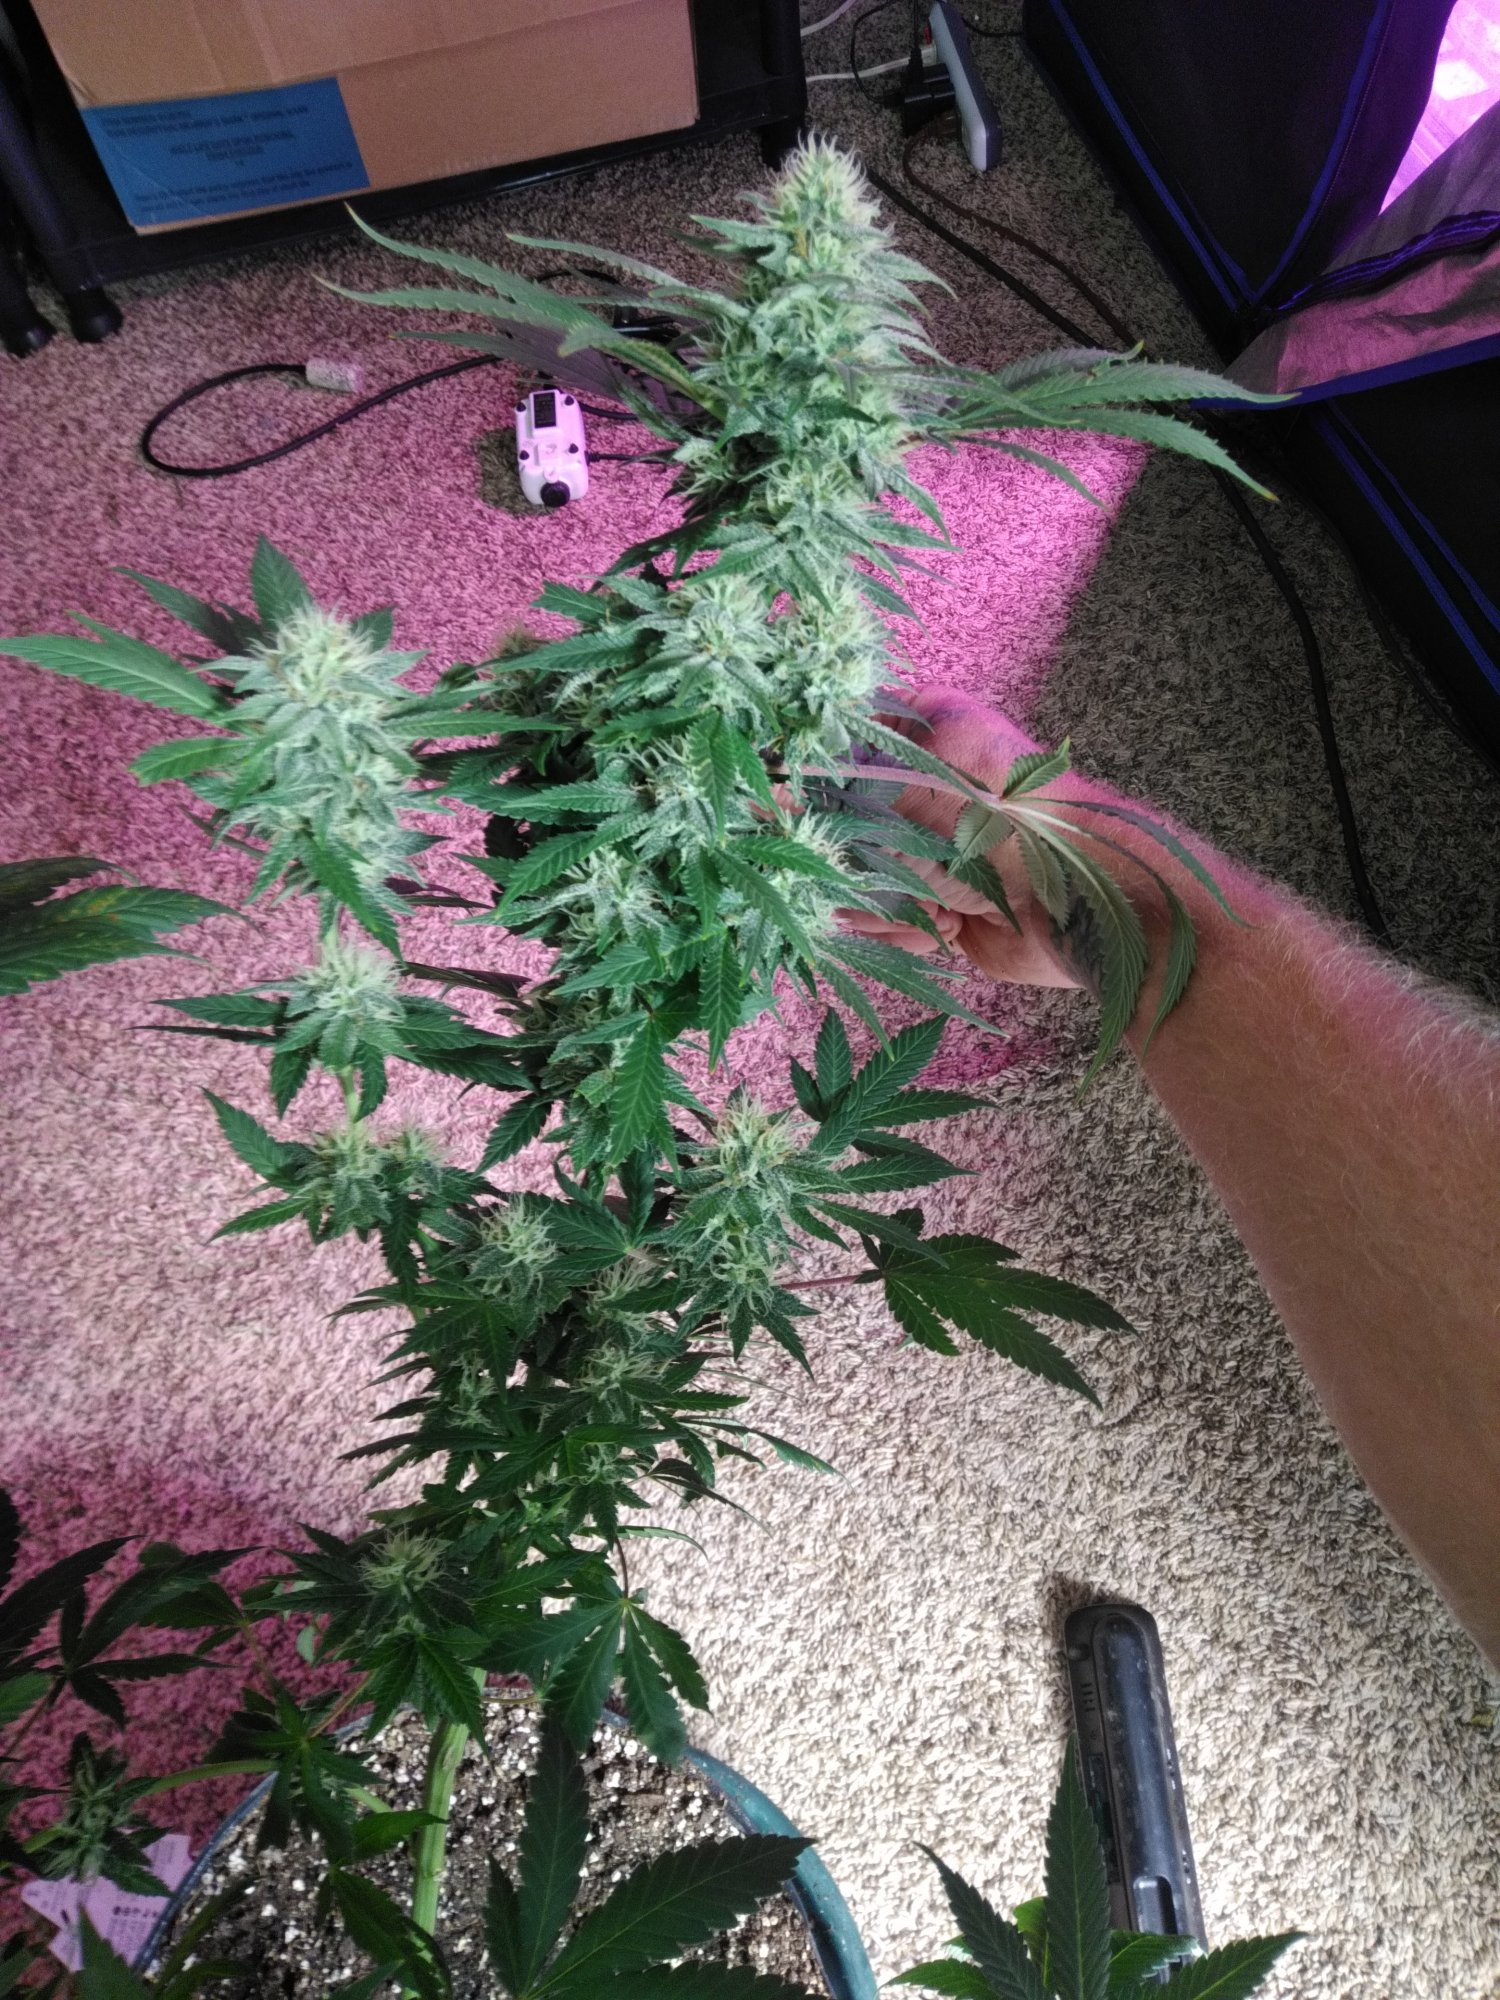 Check me out my biggest buds yet 7